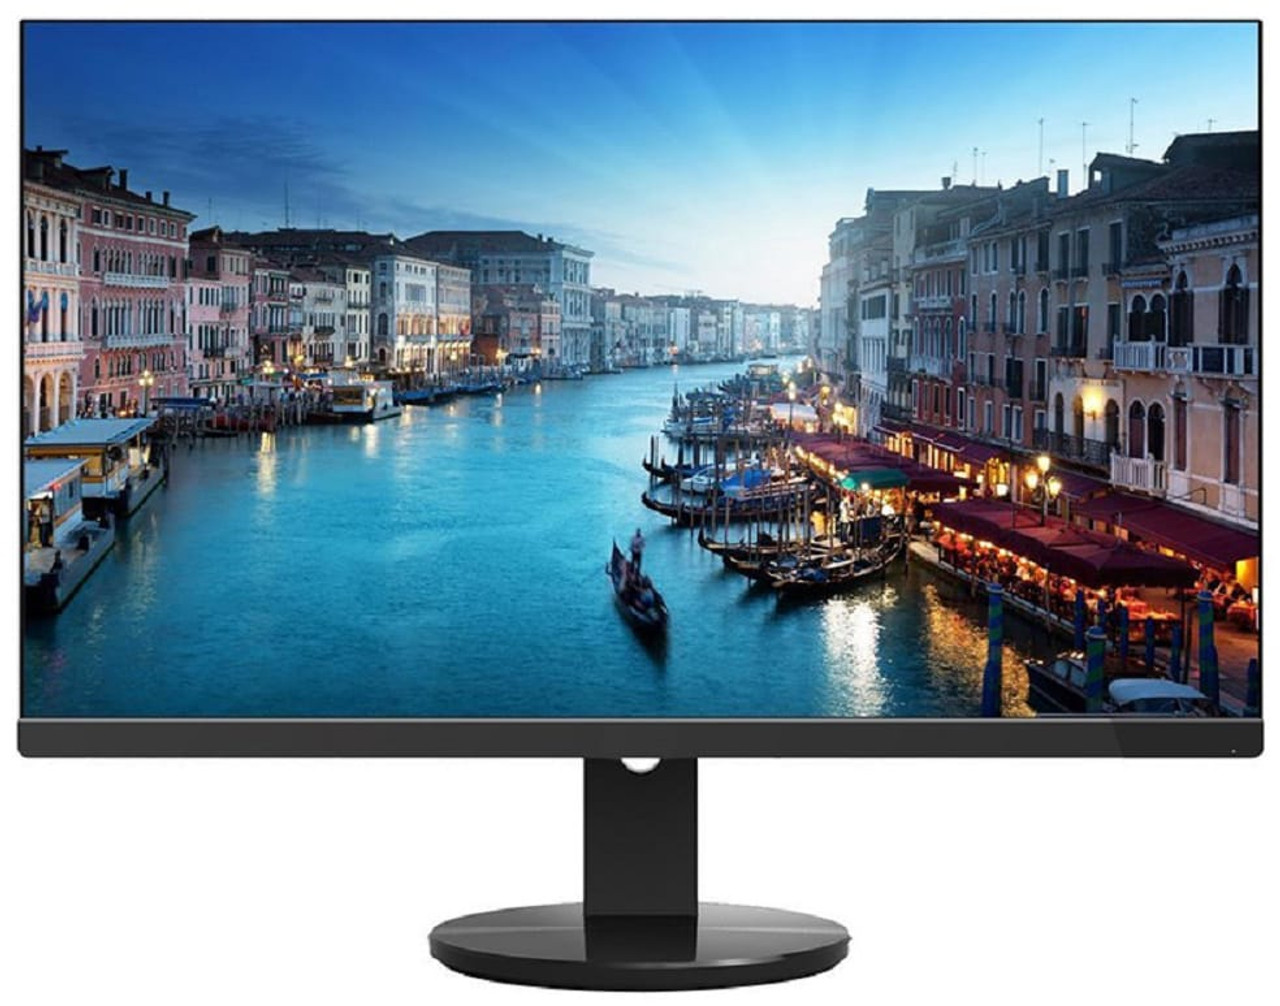 +$499 - 27" 4K Ultra Sharp UHD + HDMI / DP Cable Included